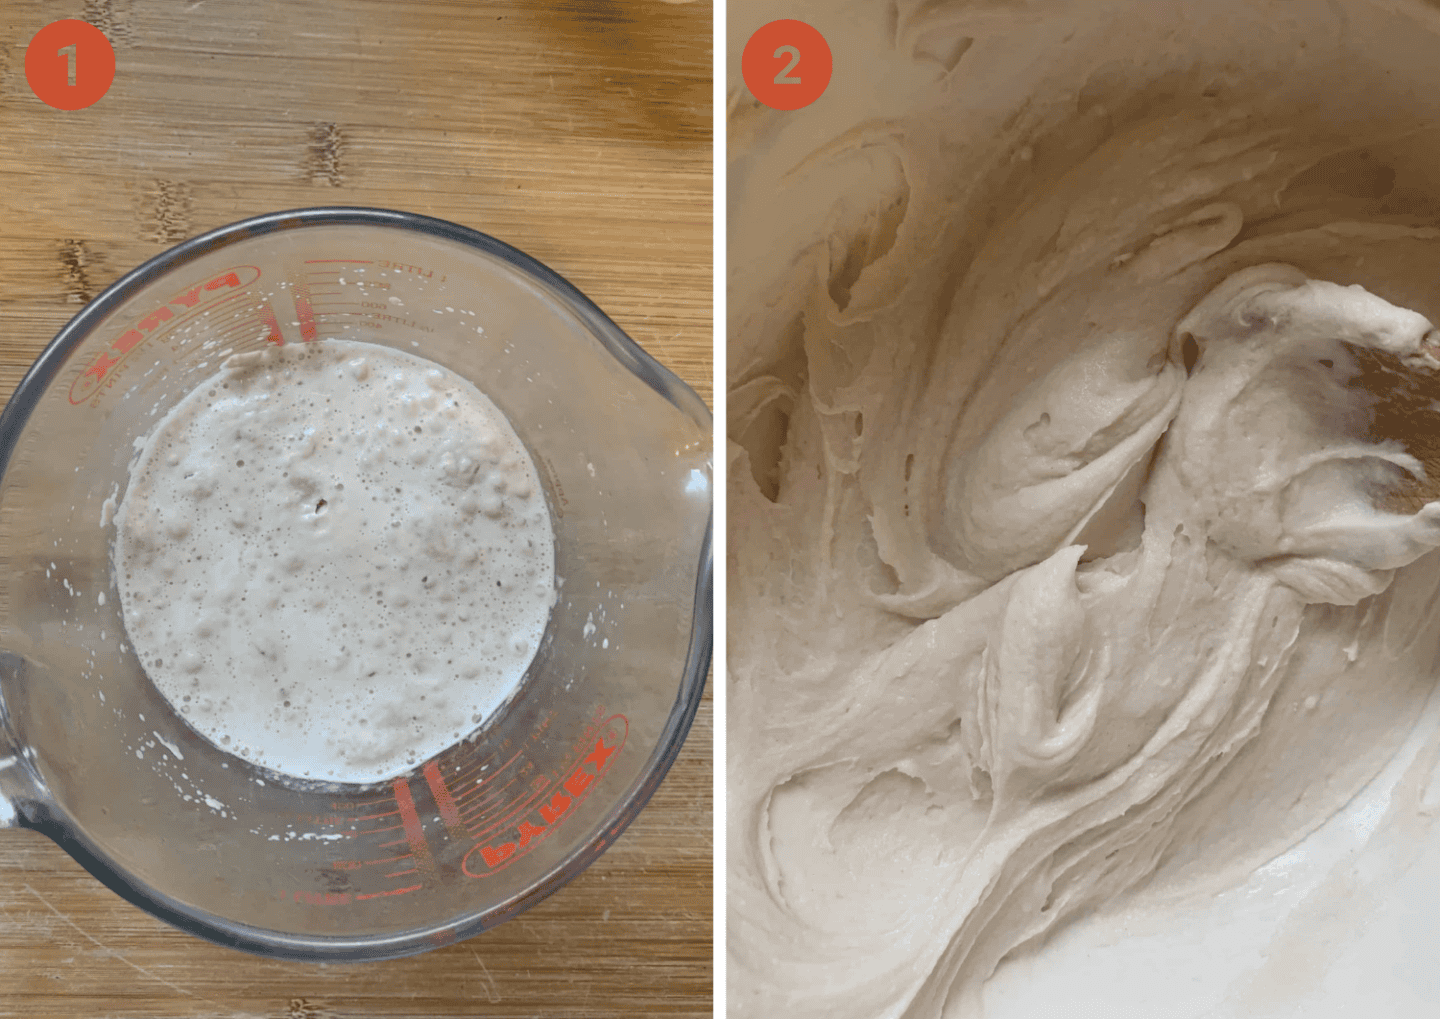 Activated yeast (left) and the focaccia bread mix (right).